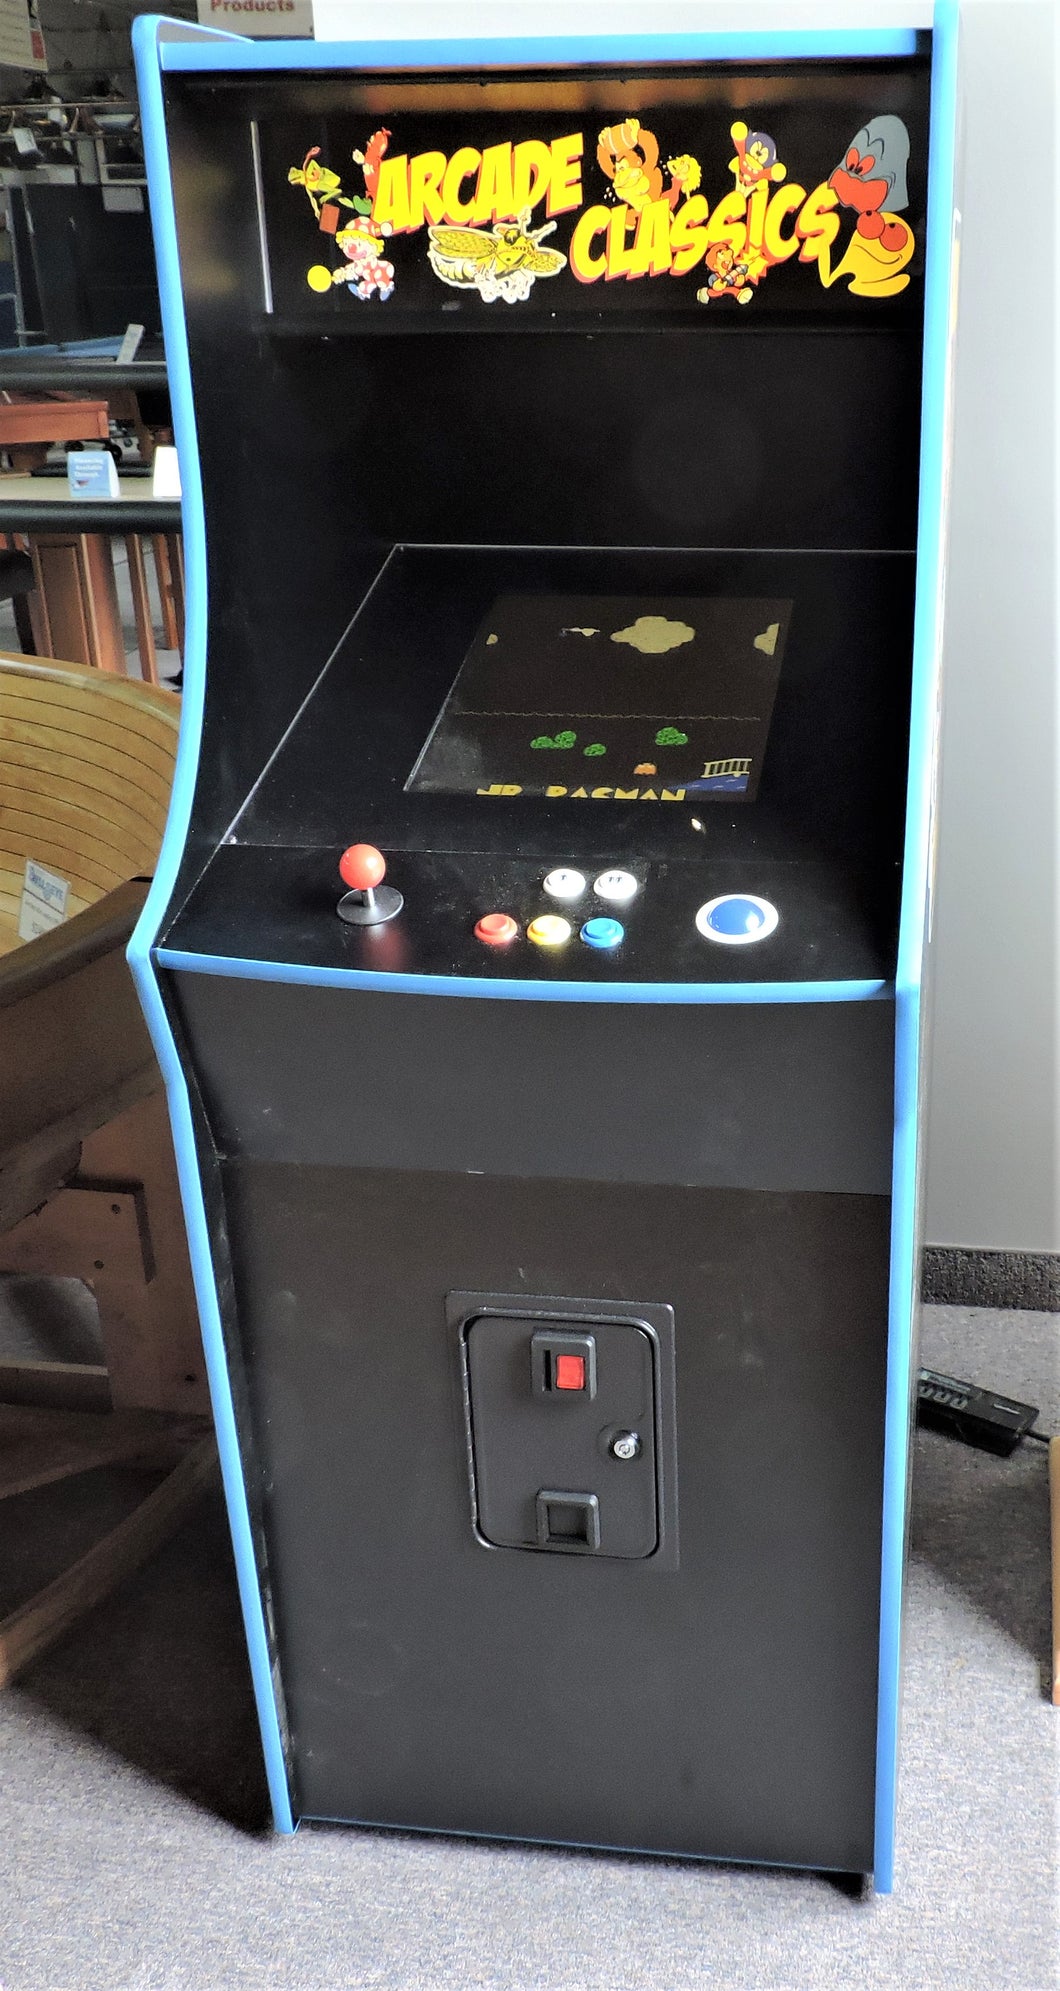 Arcade Classics stand alone video arcade game system